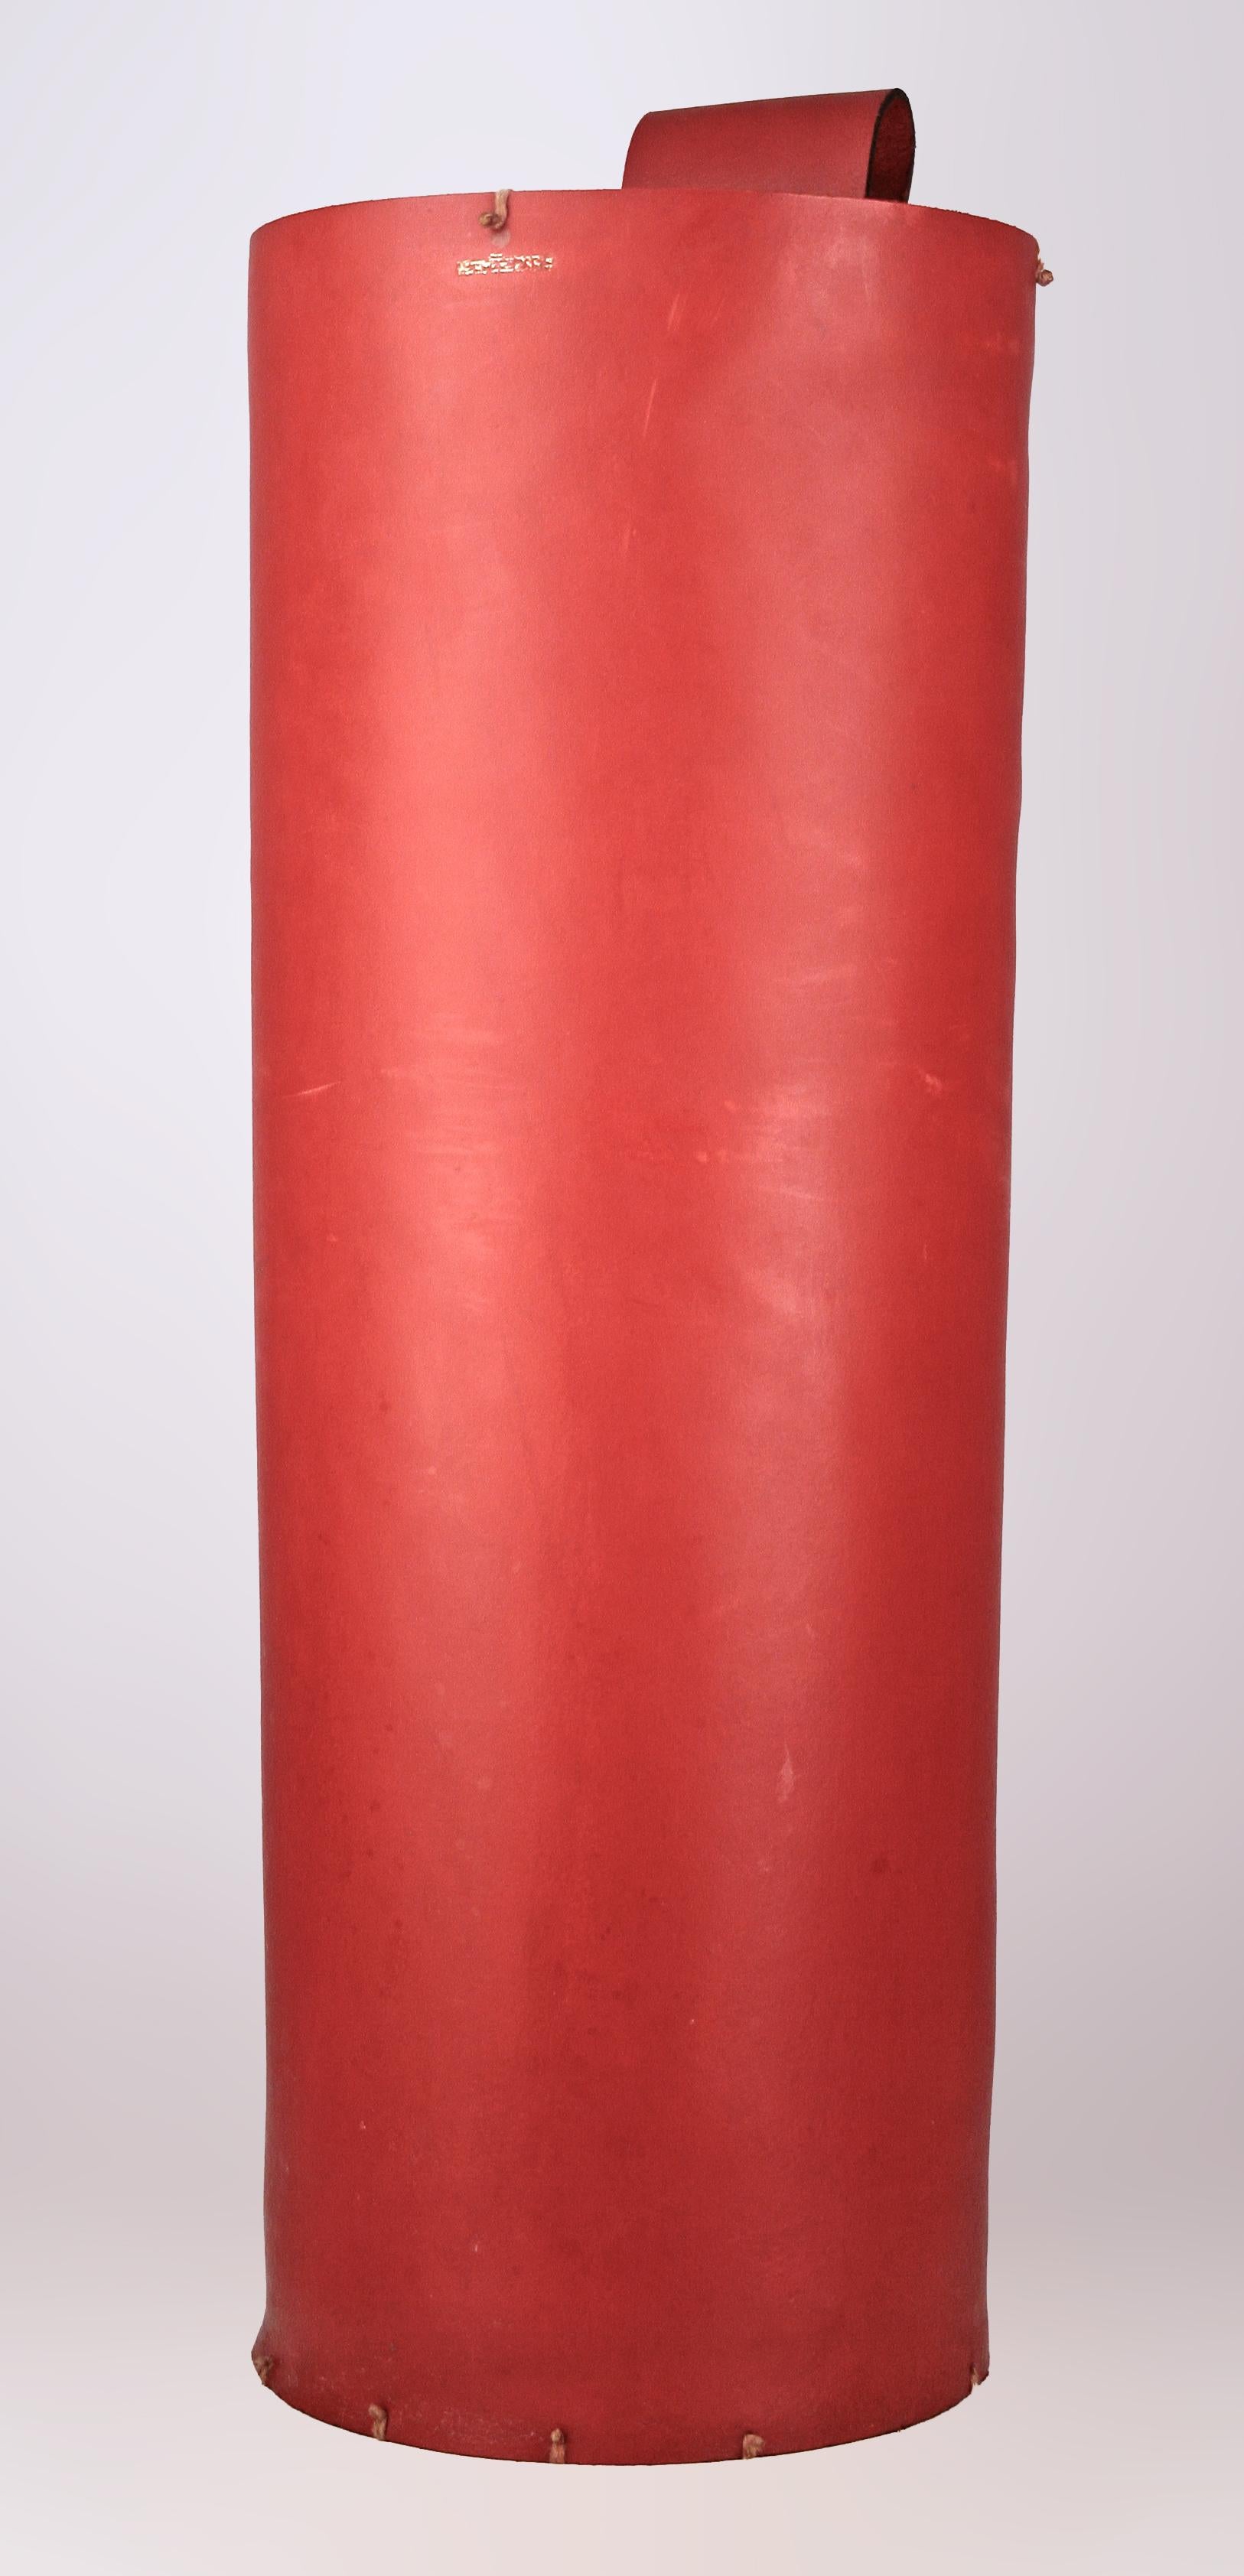 Mid-20th C. Modern French Red Leather Cylindrical Umbrella Stand by Hermès Paris For Sale 8